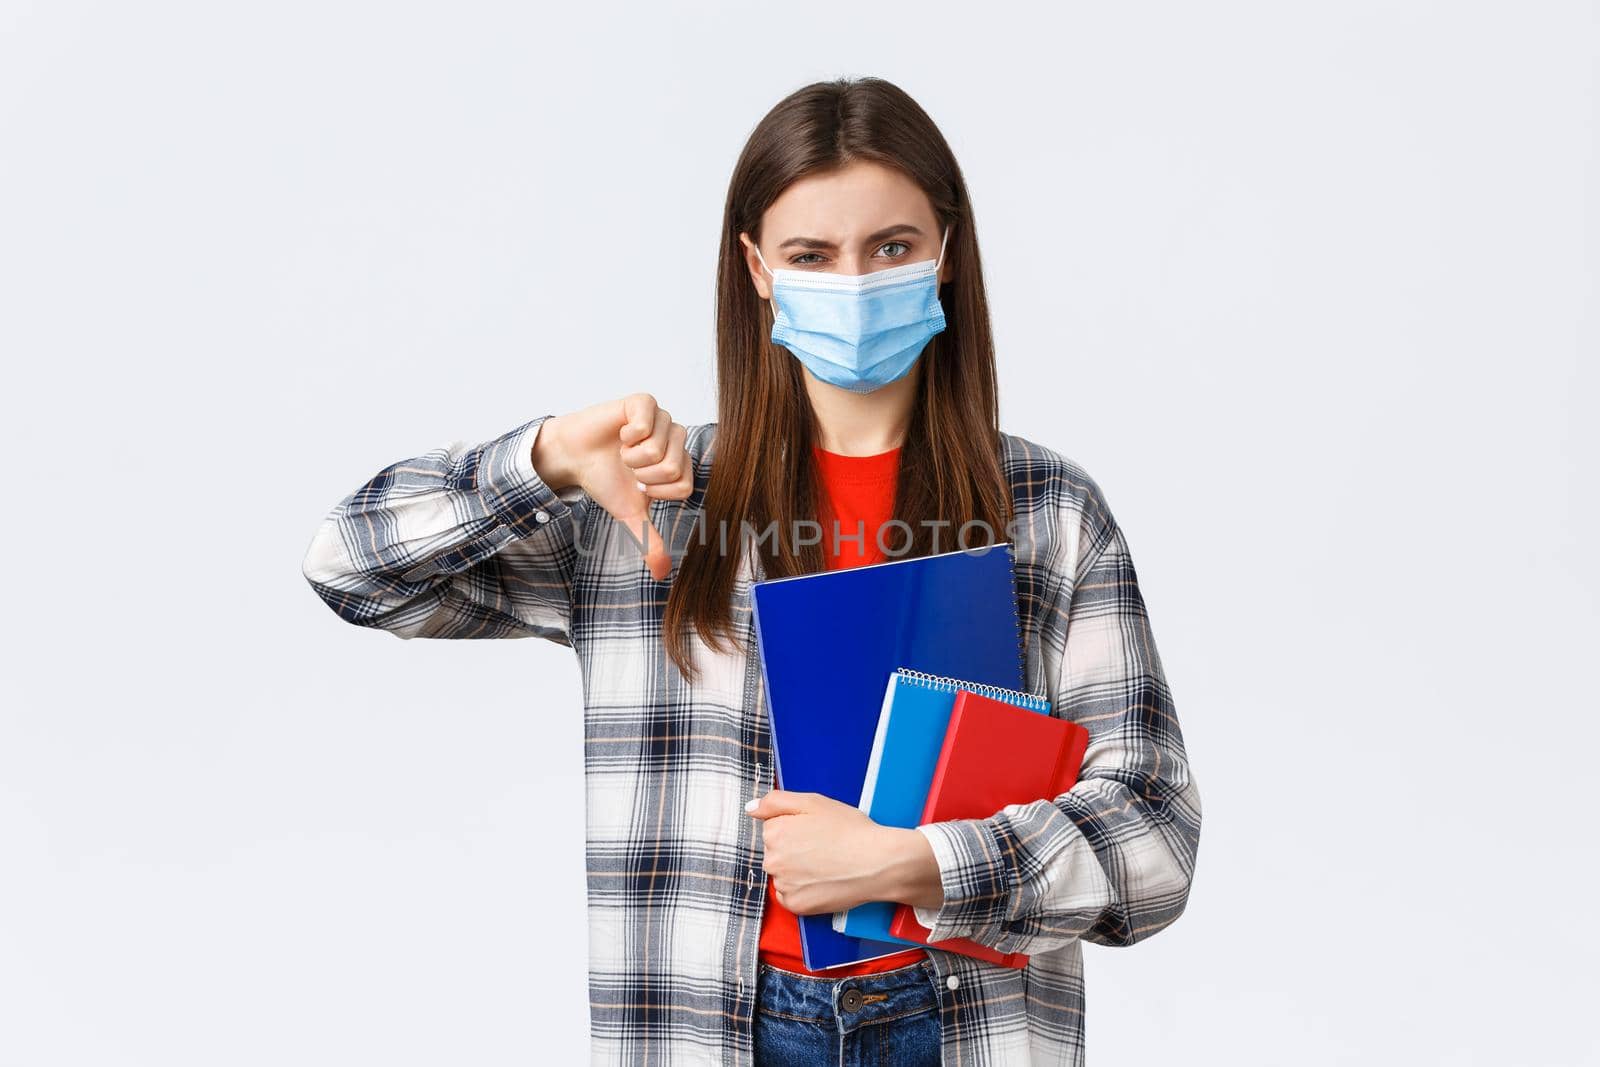 Coronavirus pandemic, covid-19 education, and back to school concept. Displeased and disappointed female student, freshman in medical mask thumb-down and grimacing discussing smth bad.